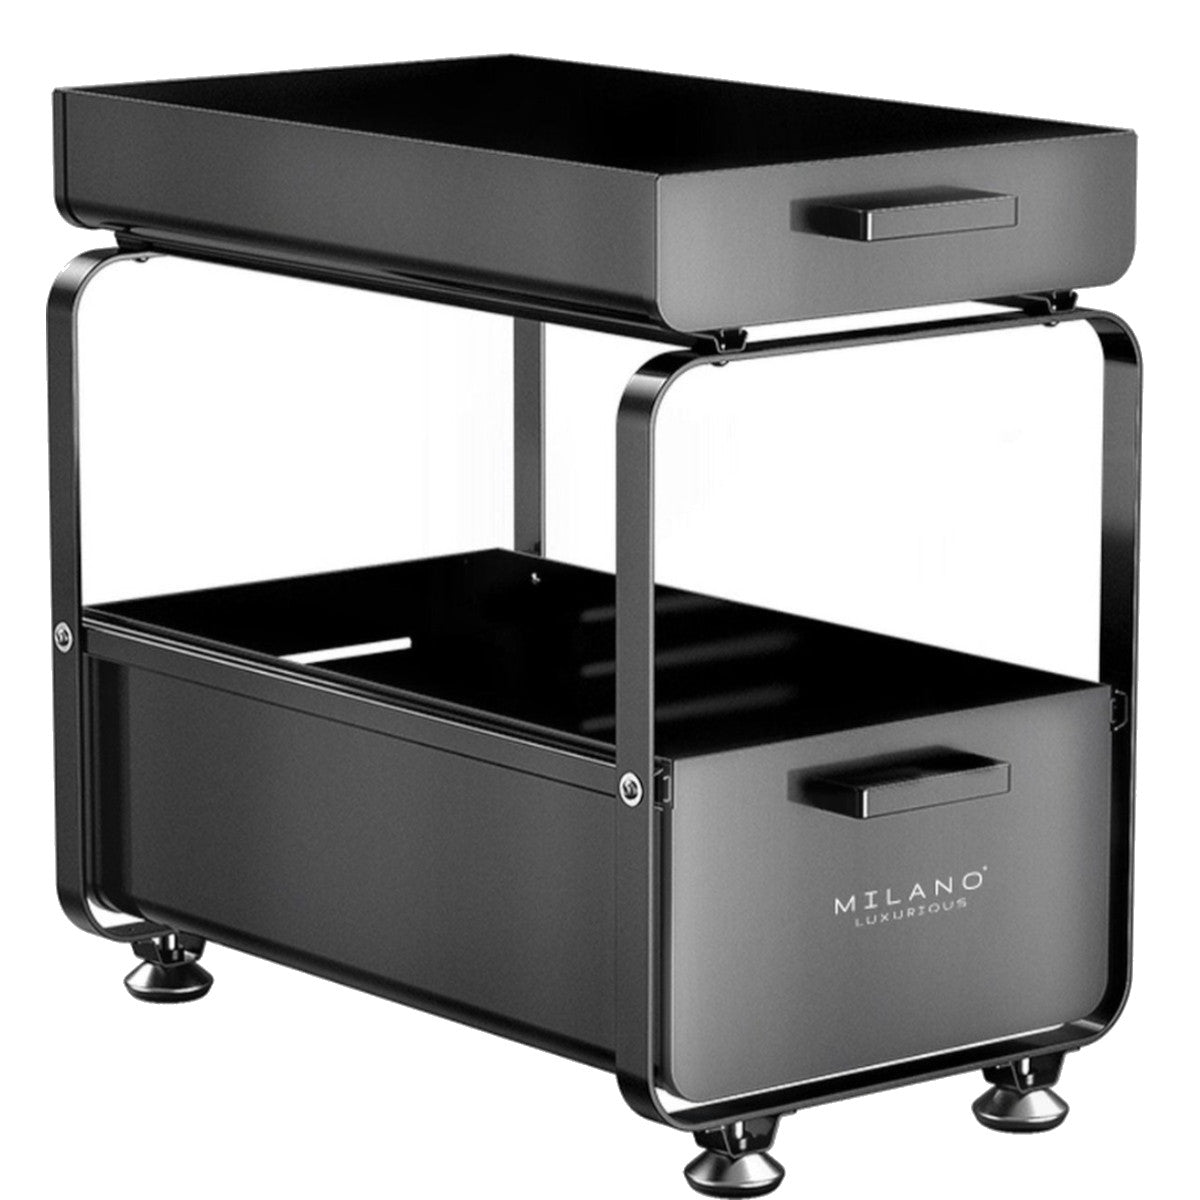 Milano Luxurious closed organizer with 2 pull-out drawers - Black